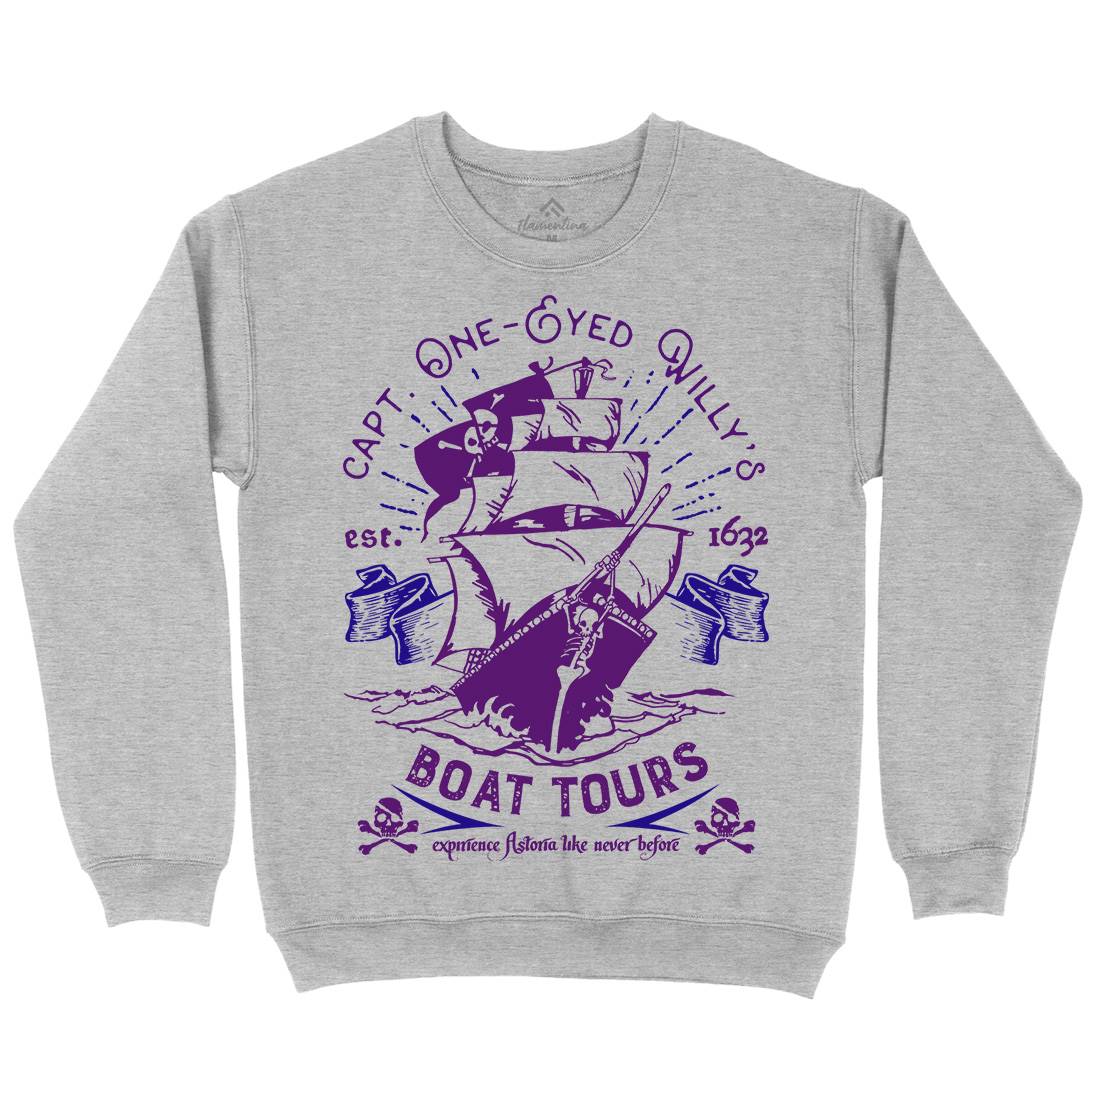 One-Eyed Willys Boat Tours Mens Crew Neck Sweatshirt Horror D160